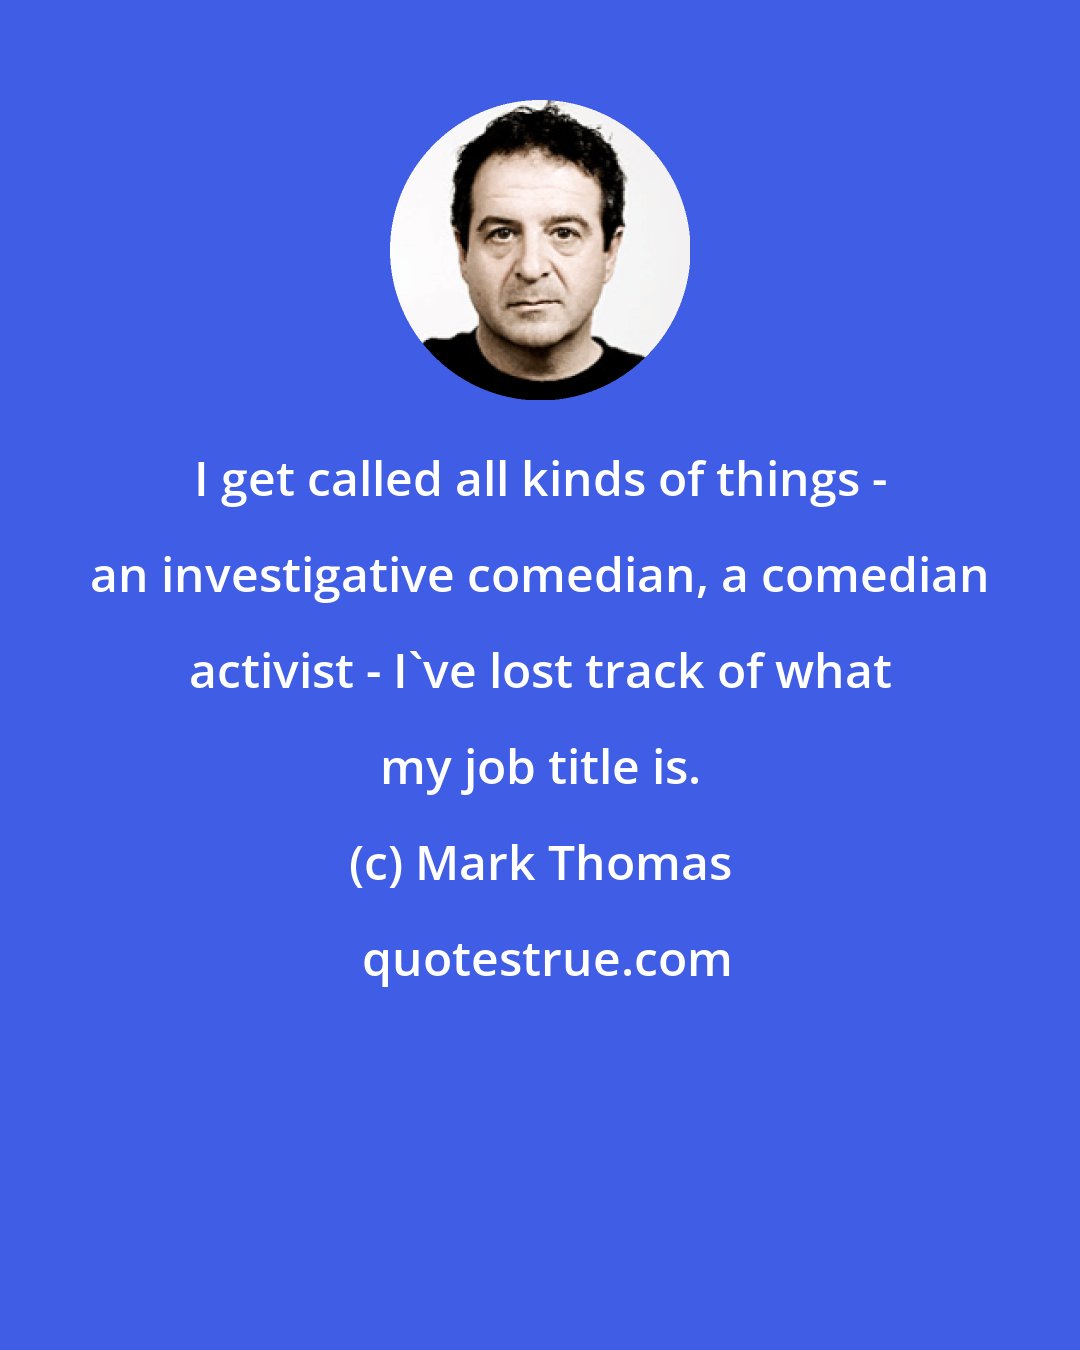 Mark Thomas: I get called all kinds of things - an investigative comedian, a comedian activist - I've lost track of what my job title is.